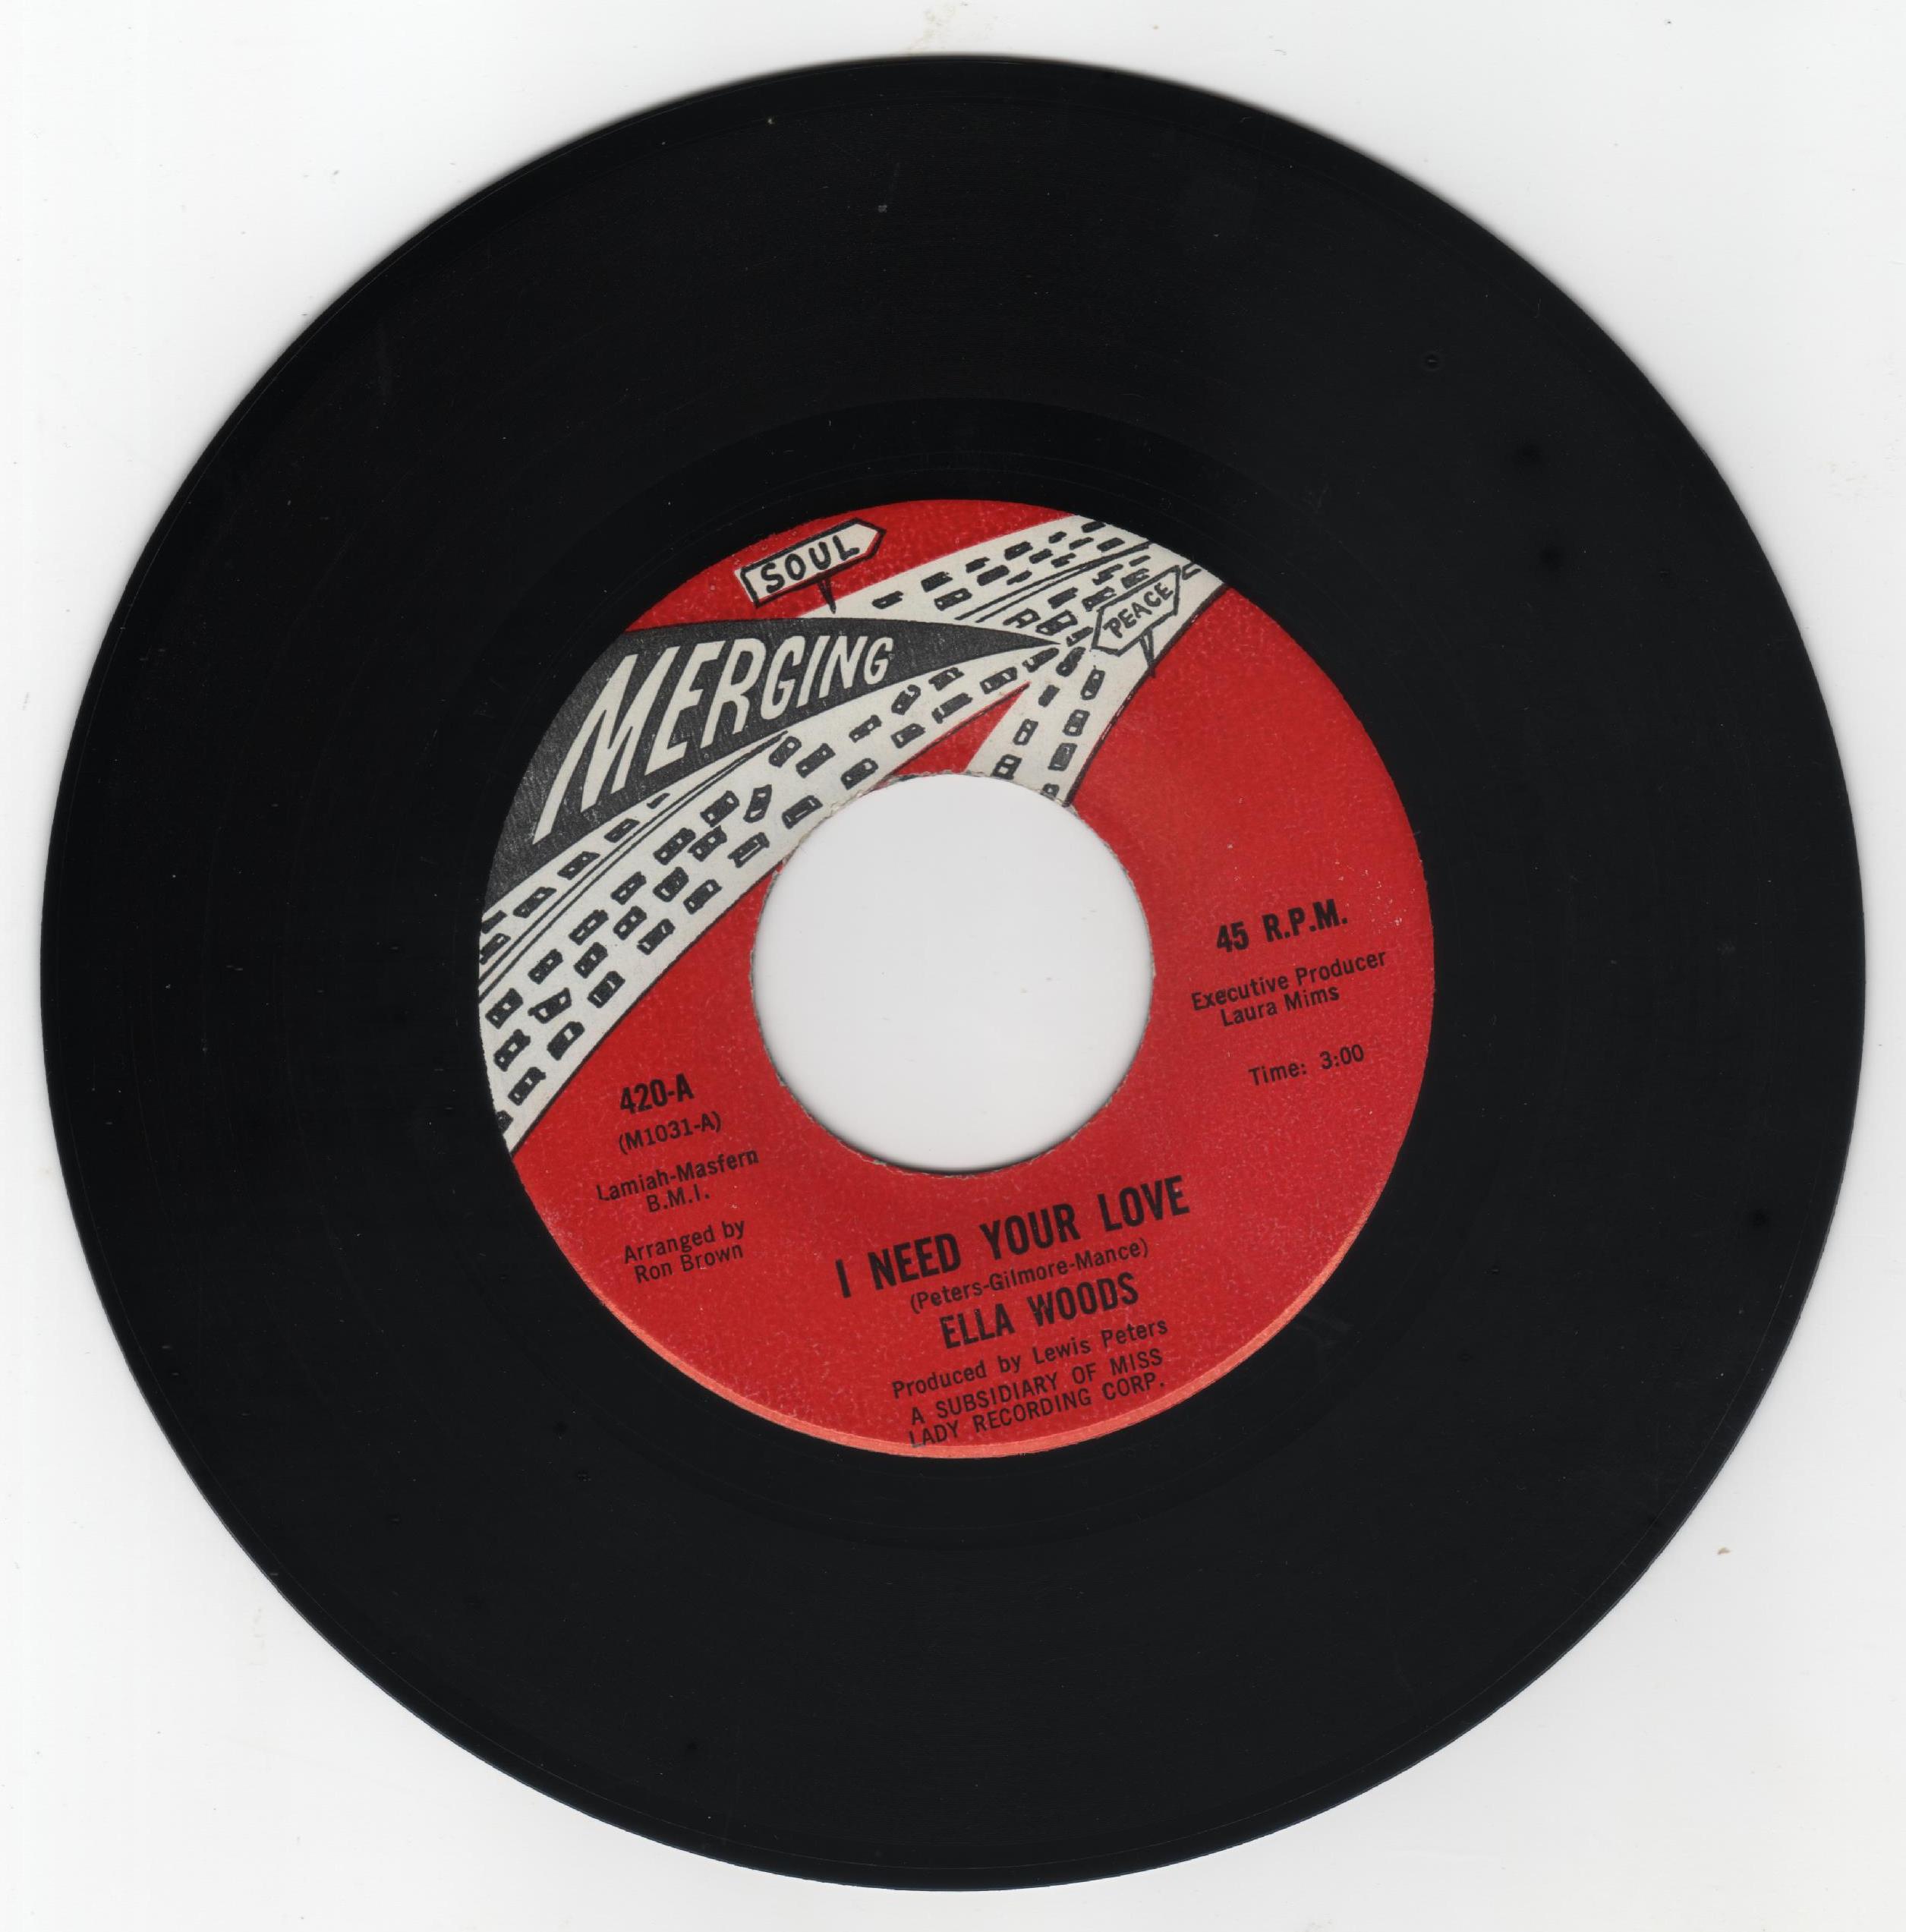 Ella Woods - I Need Your Love - Merging (Sold) - Soul Source